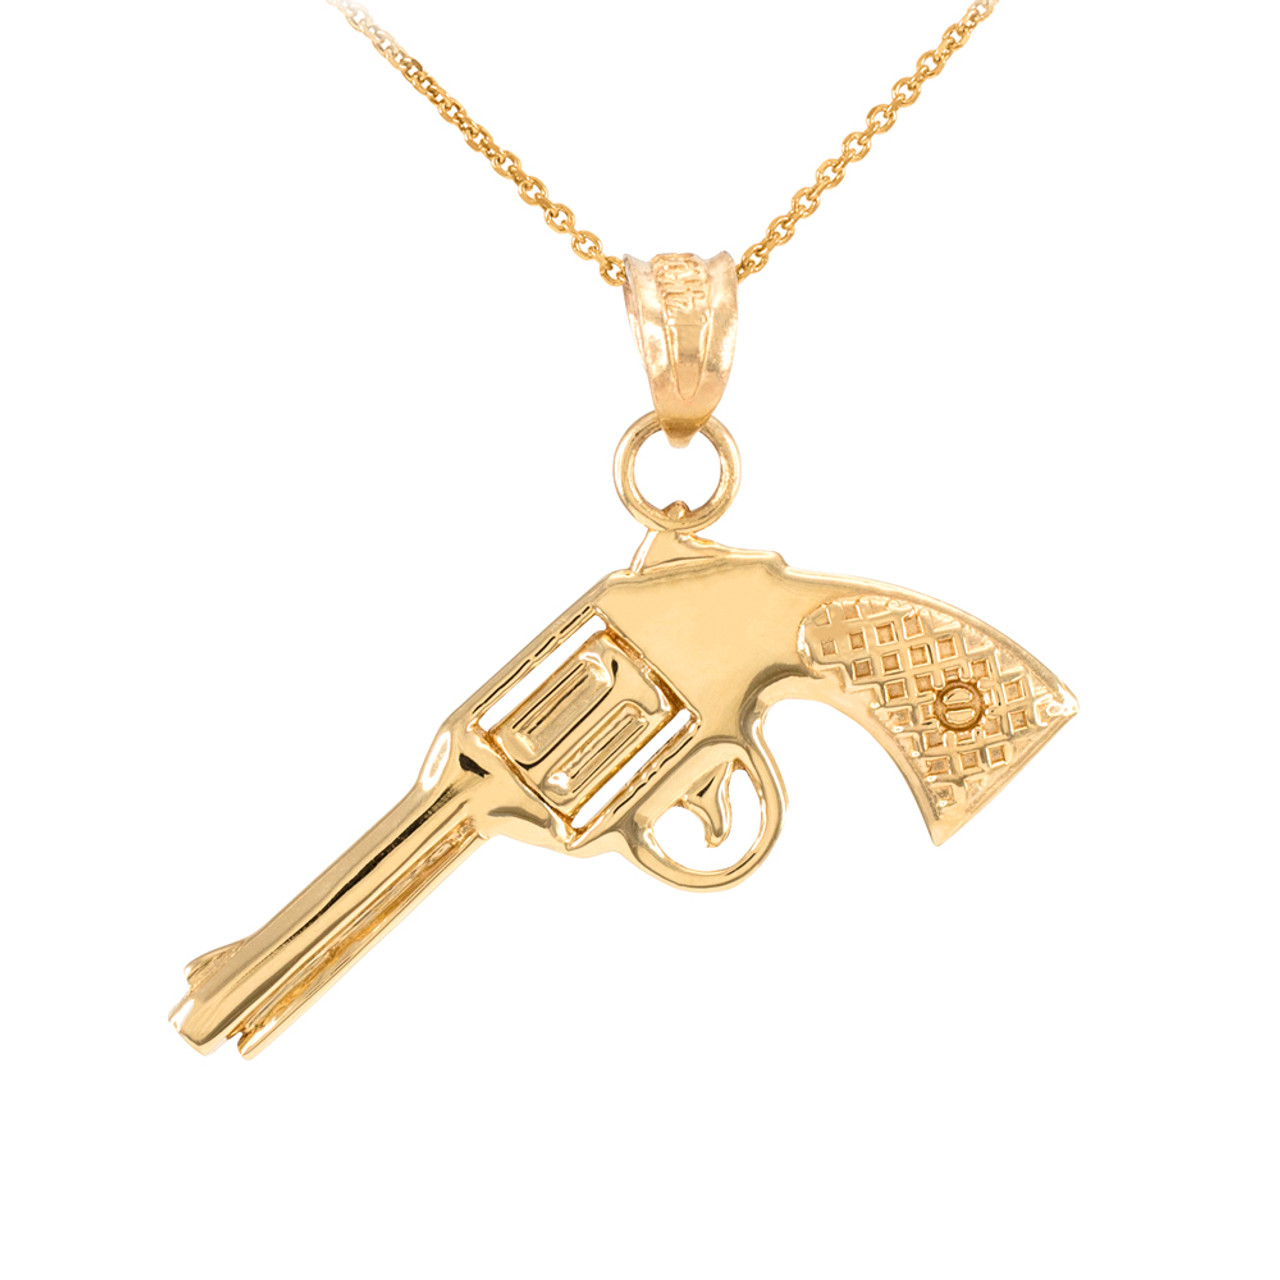 Details about   New Real Solid 14K Gold 3D Cowboy Revolver Gun Charm 